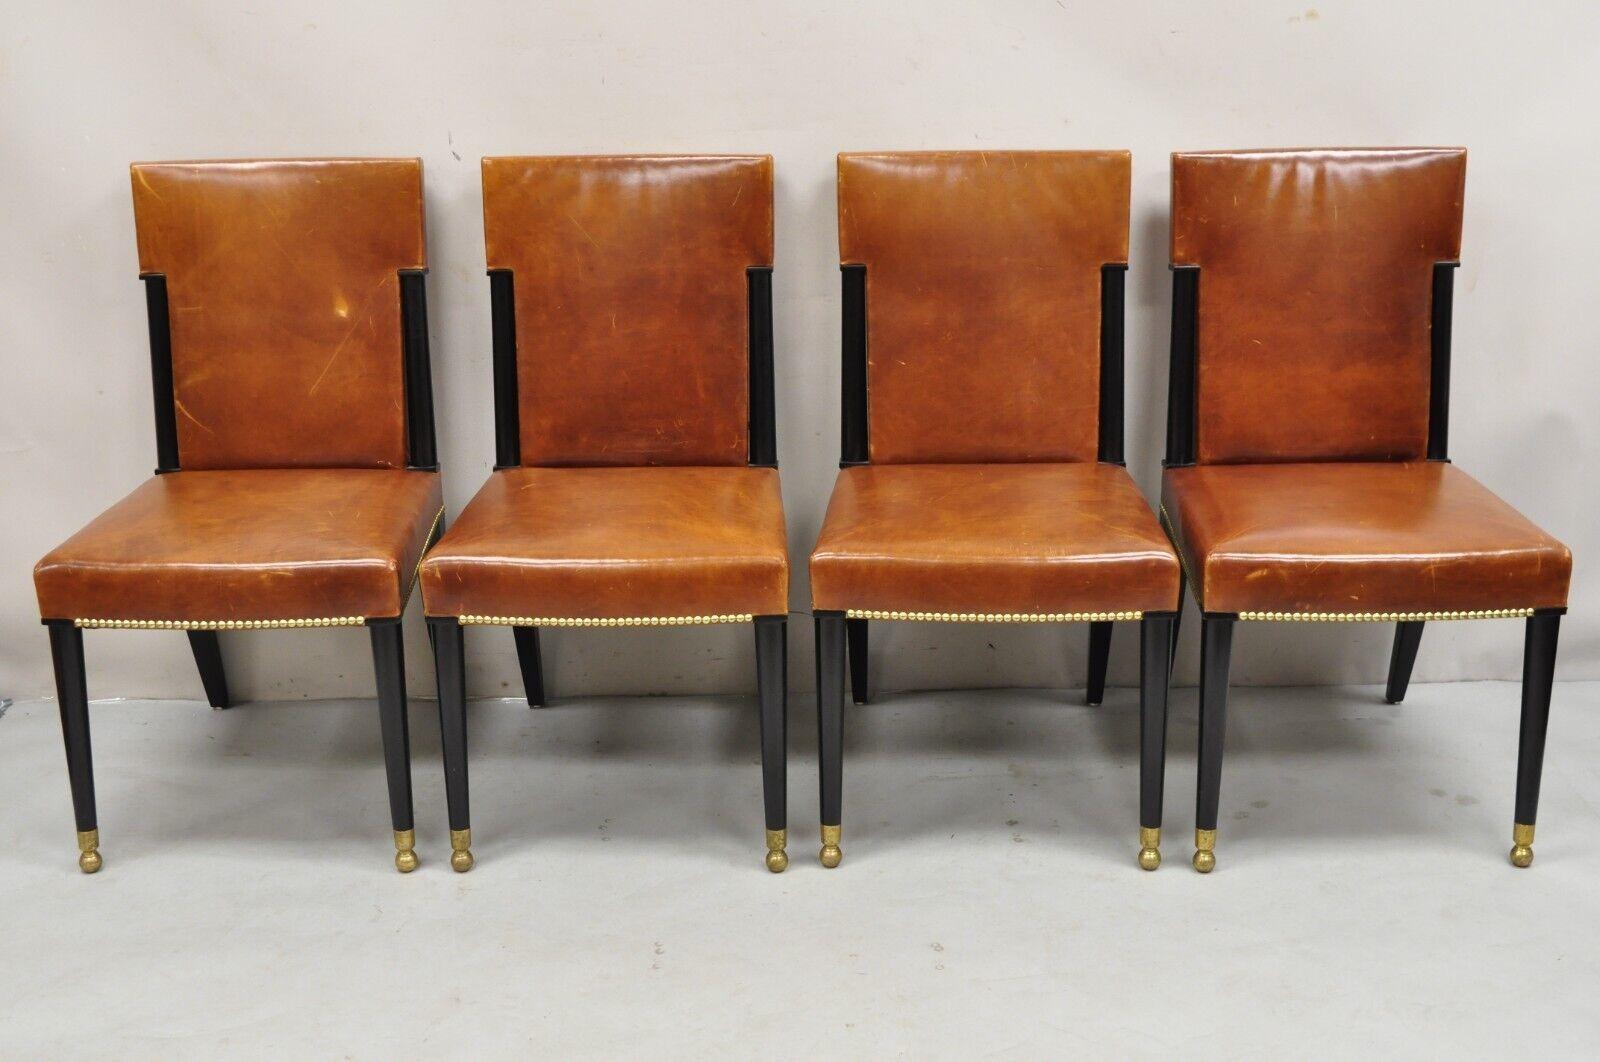 French Art Deco Style Brown Leather Ebonized Frame Dining Chairs - Set of 8 In Good Condition For Sale In Philadelphia, PA